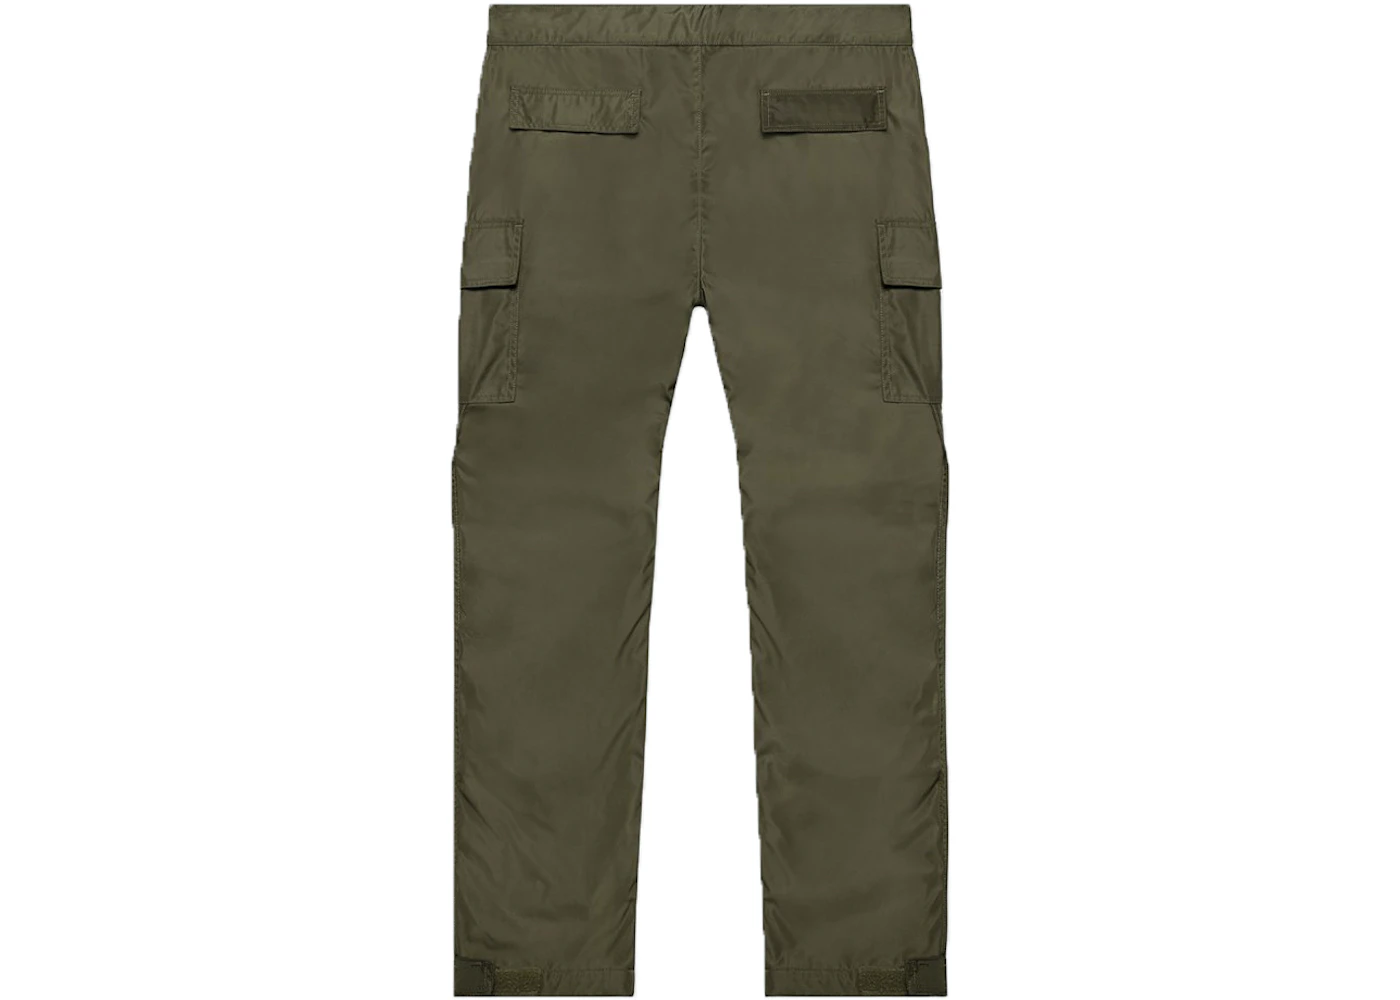 FEAR OF GOD Nylon Cargo Pants Olive Green - Sixth Collection - US